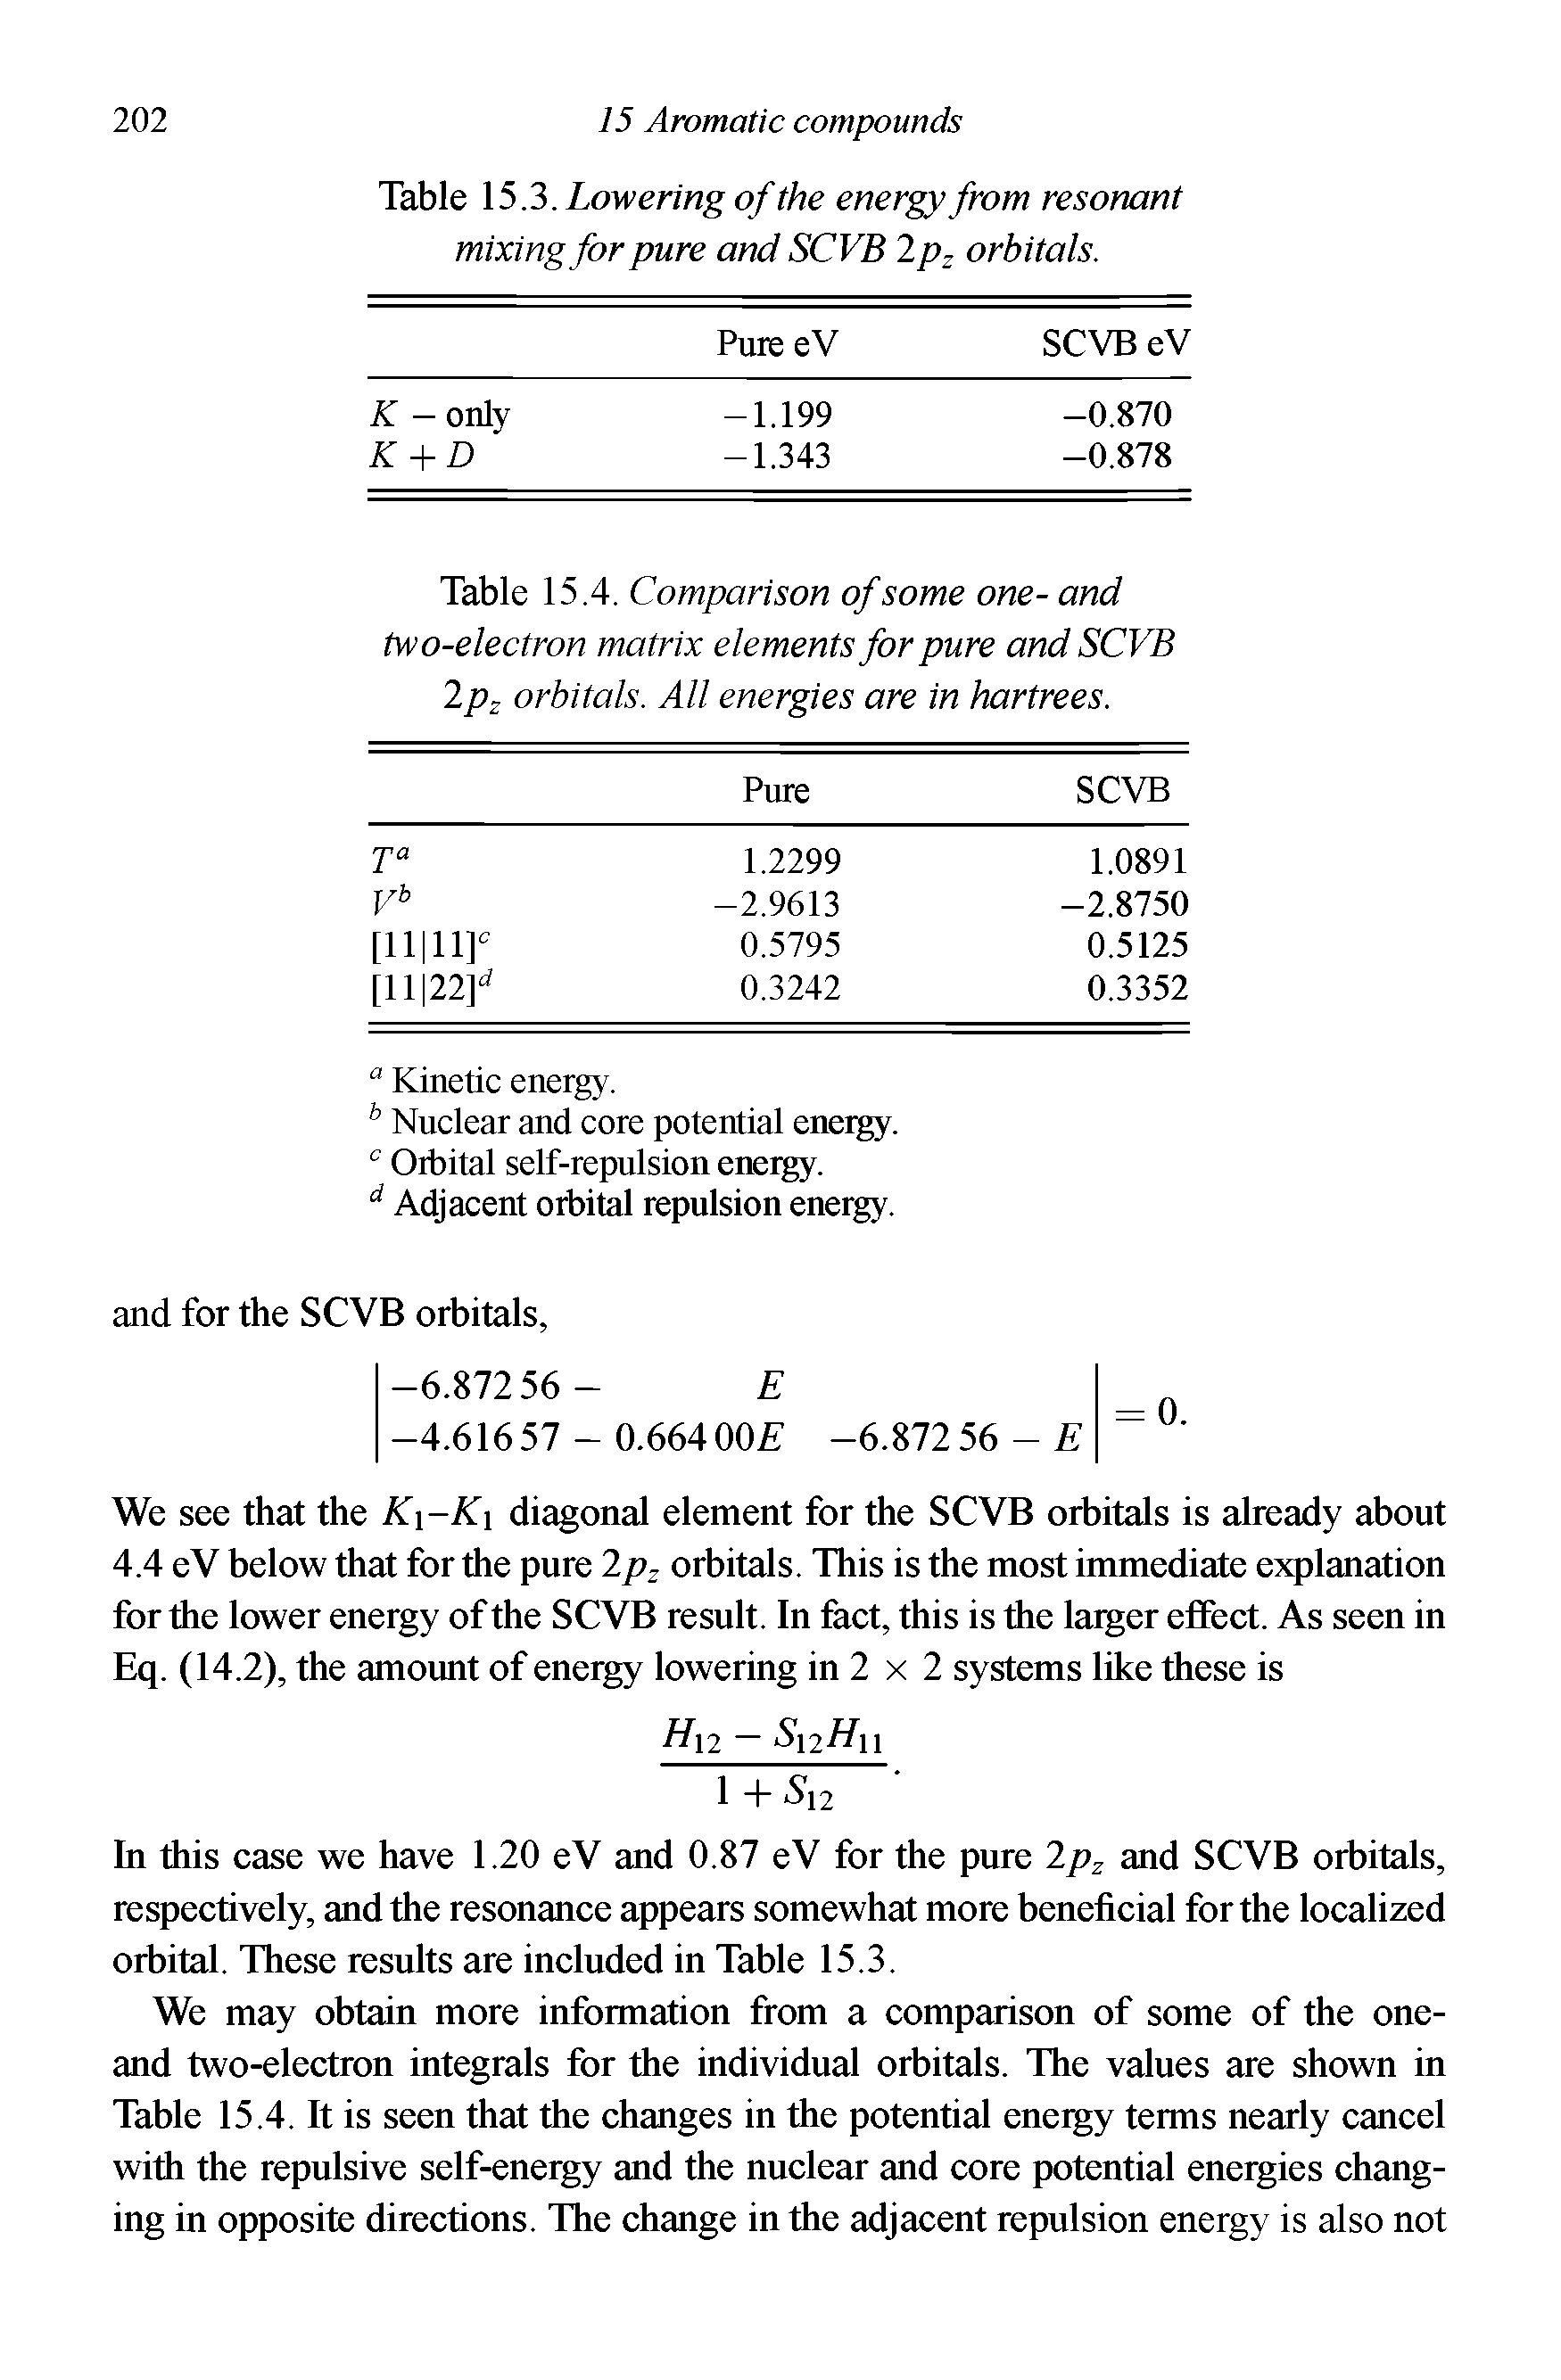 Table 15.4. Comparison of some one- and two-electron matrix elements for pure and SCVB 2pz orbitals. All energies are in hartrees.